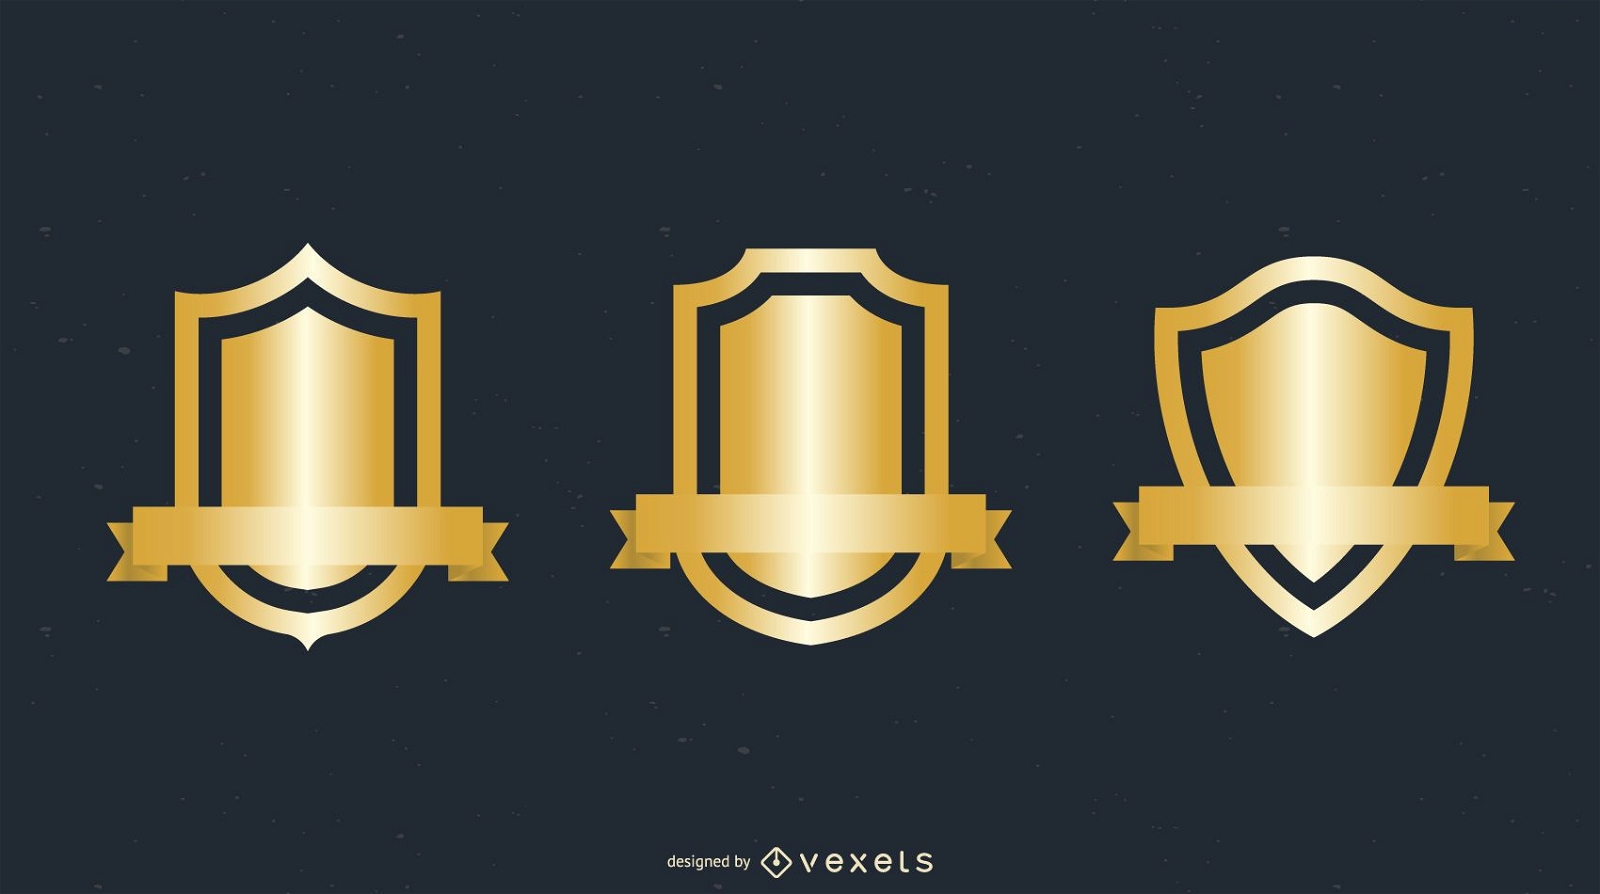 Gold Shield High-Res Vector Graphic - Getty Images